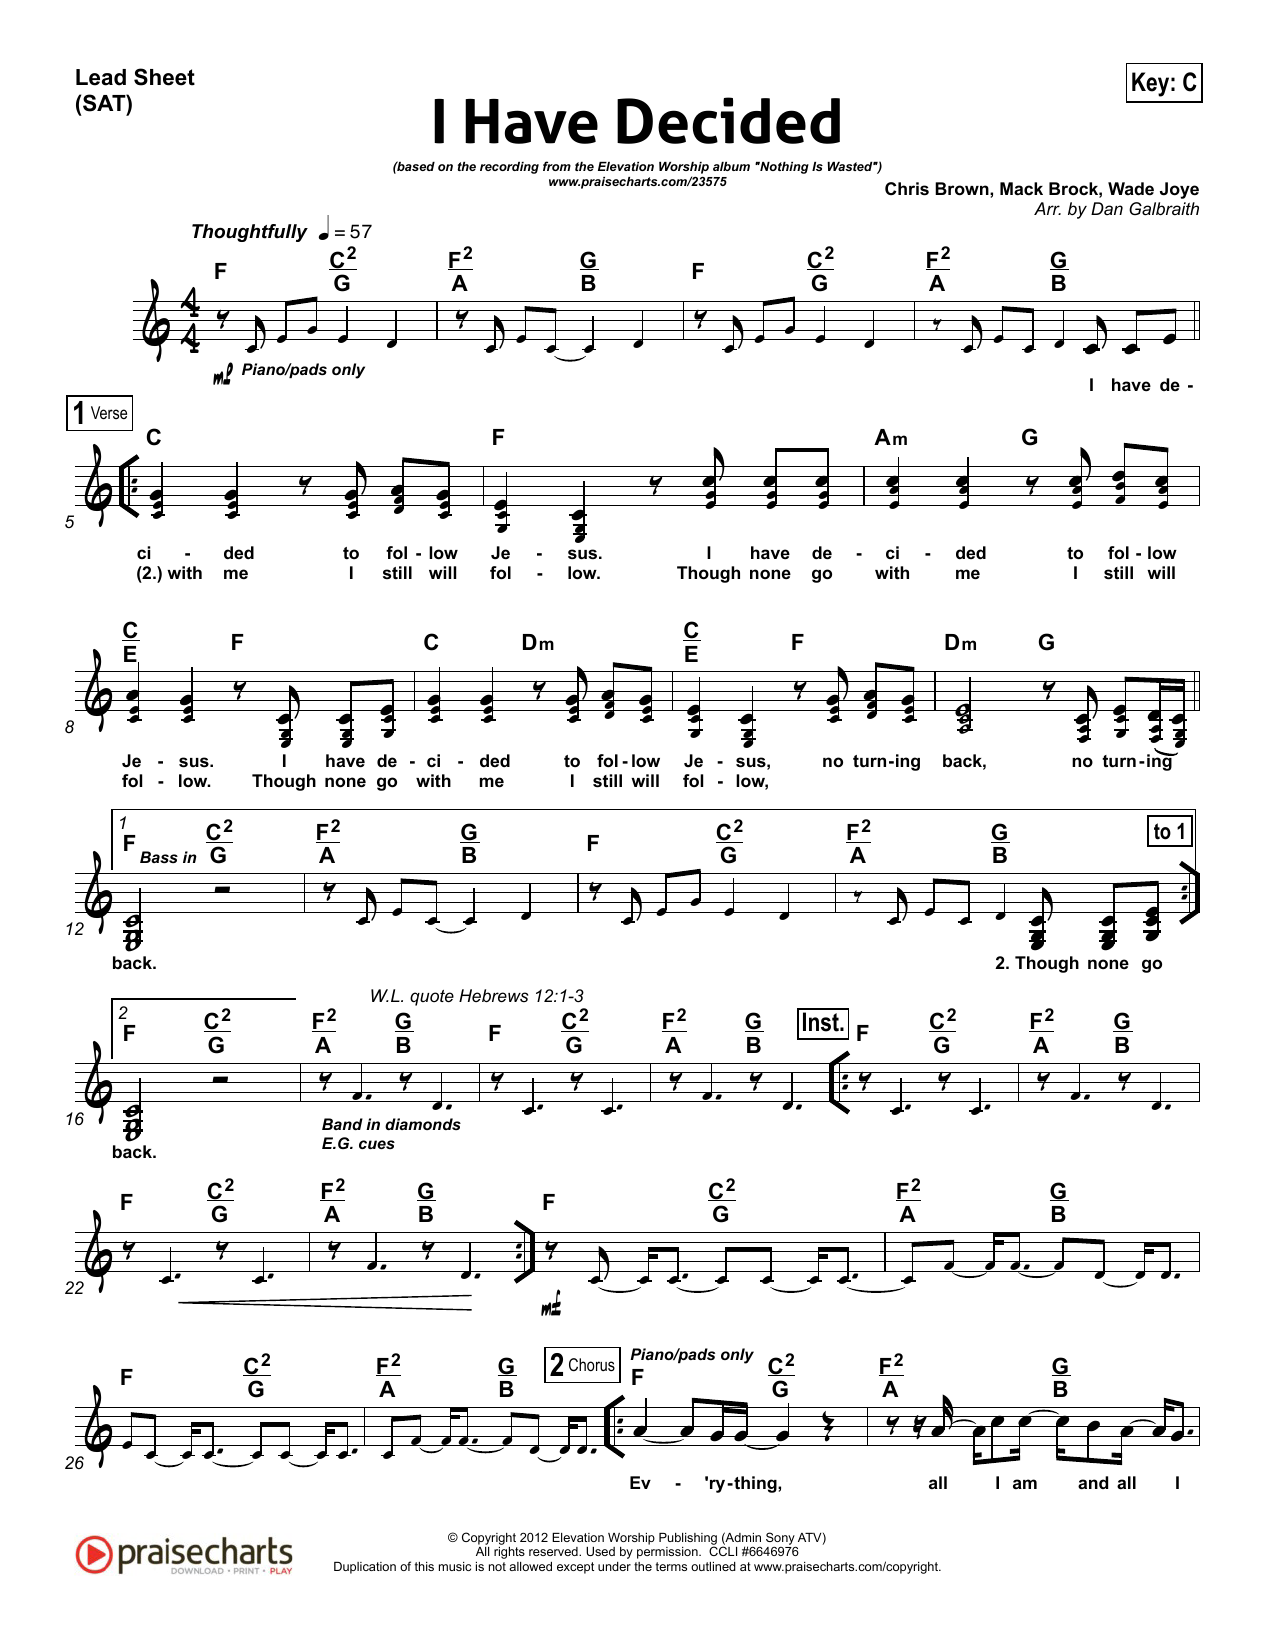 I Have Decided sheet music